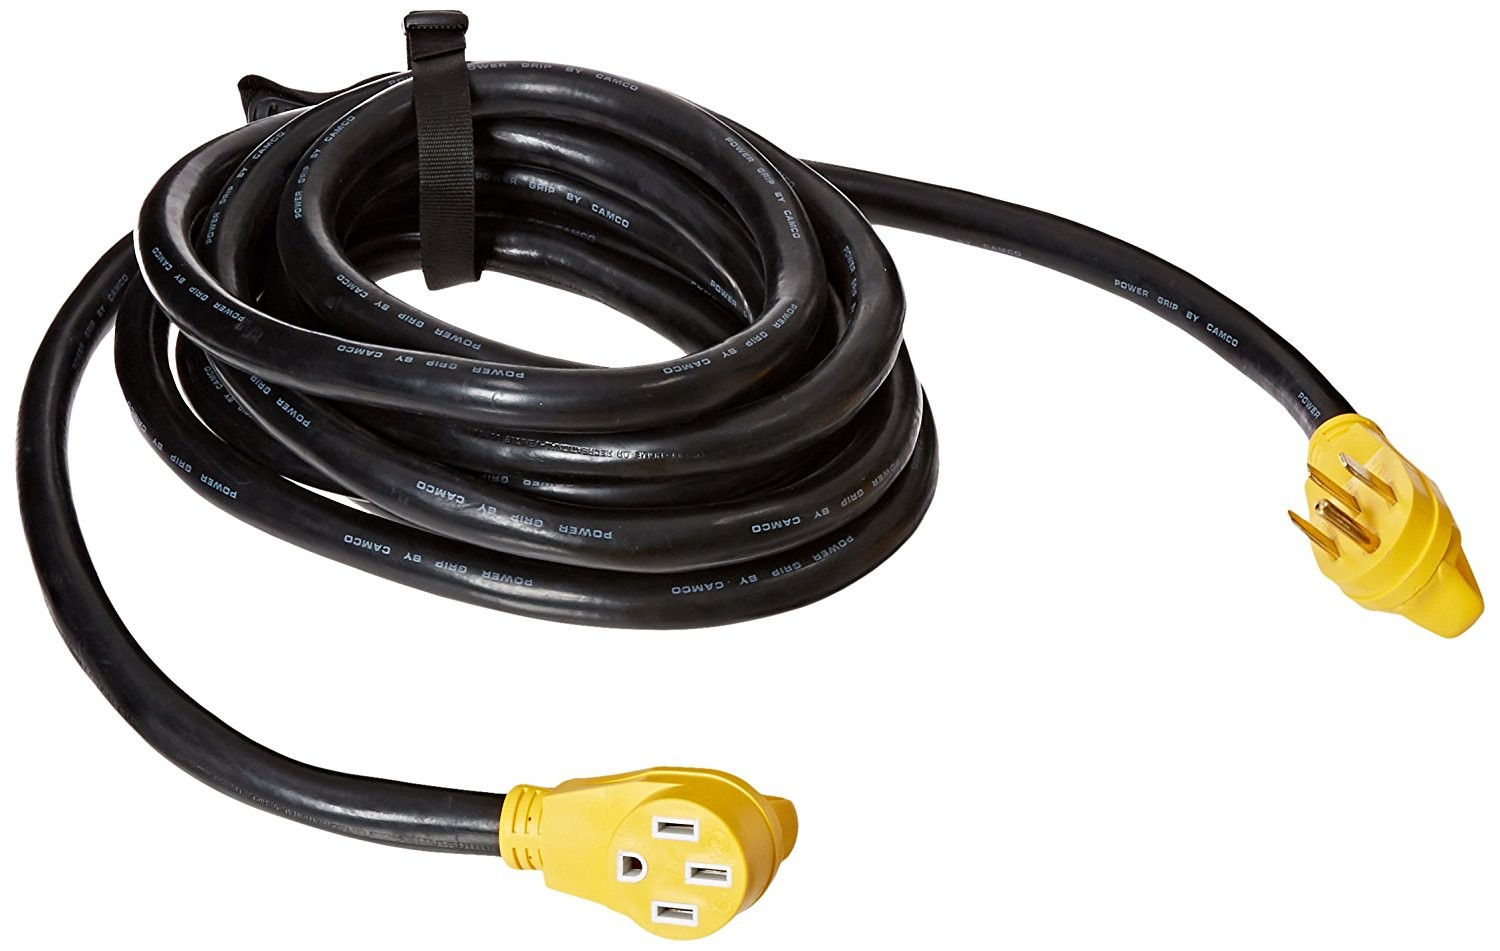 NEMA 14 50 extension cords 40 amps max charge rate